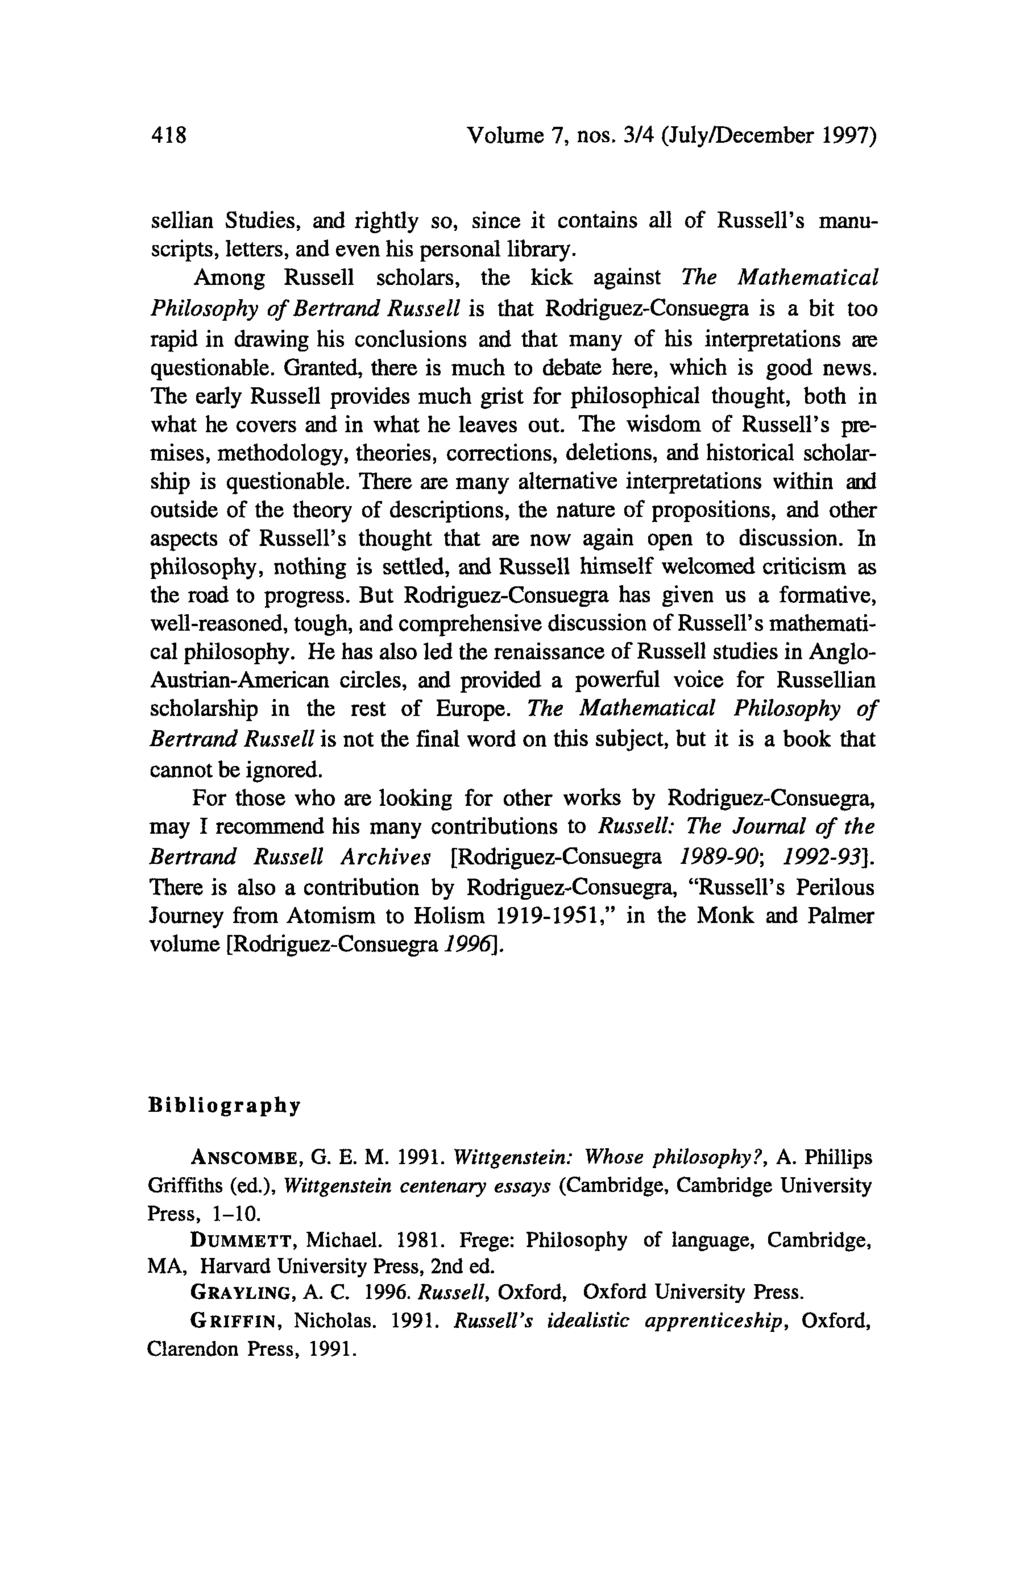 418 Volume 7, nos. 3/4 (July/December 1997) sellian Studies, and rightly so, since it contains all of Russell's manuscripts, letters, and even his personal library.